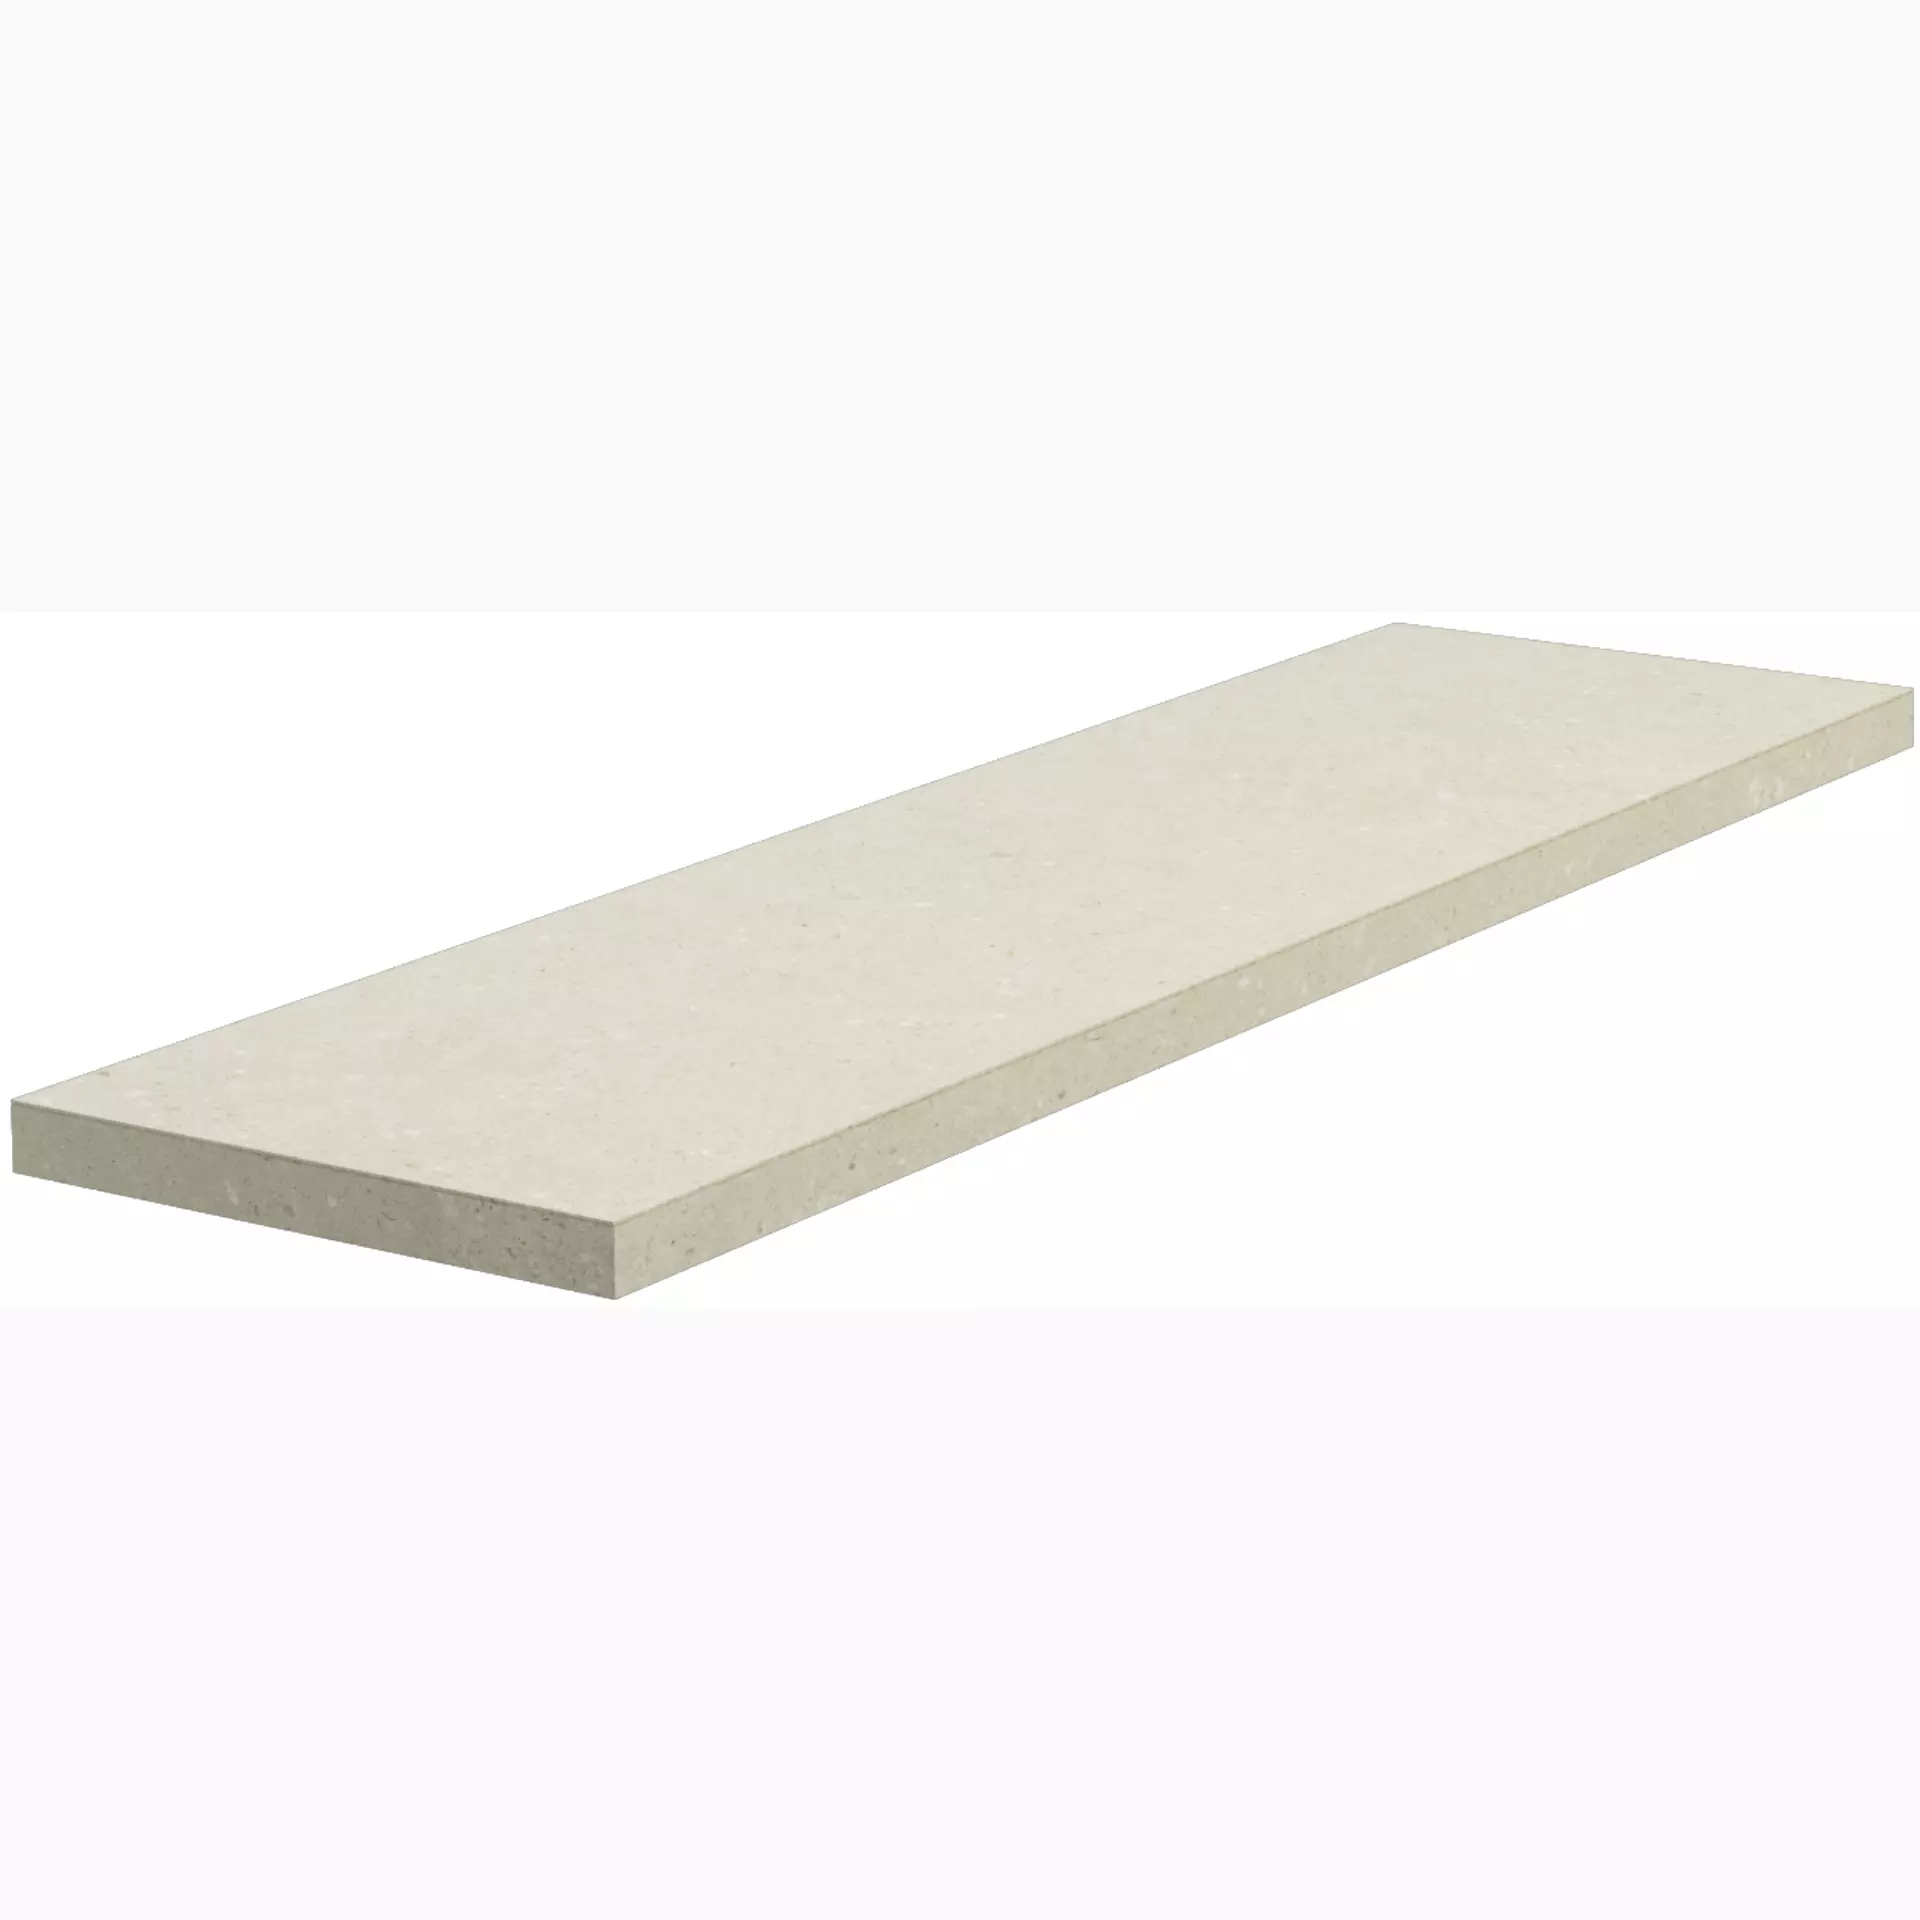 Del Conca Hwd Wild White Hwd10 Naturale Corner plate Step Right G3WD10RGD12 33x120cm rectified 8,5mm